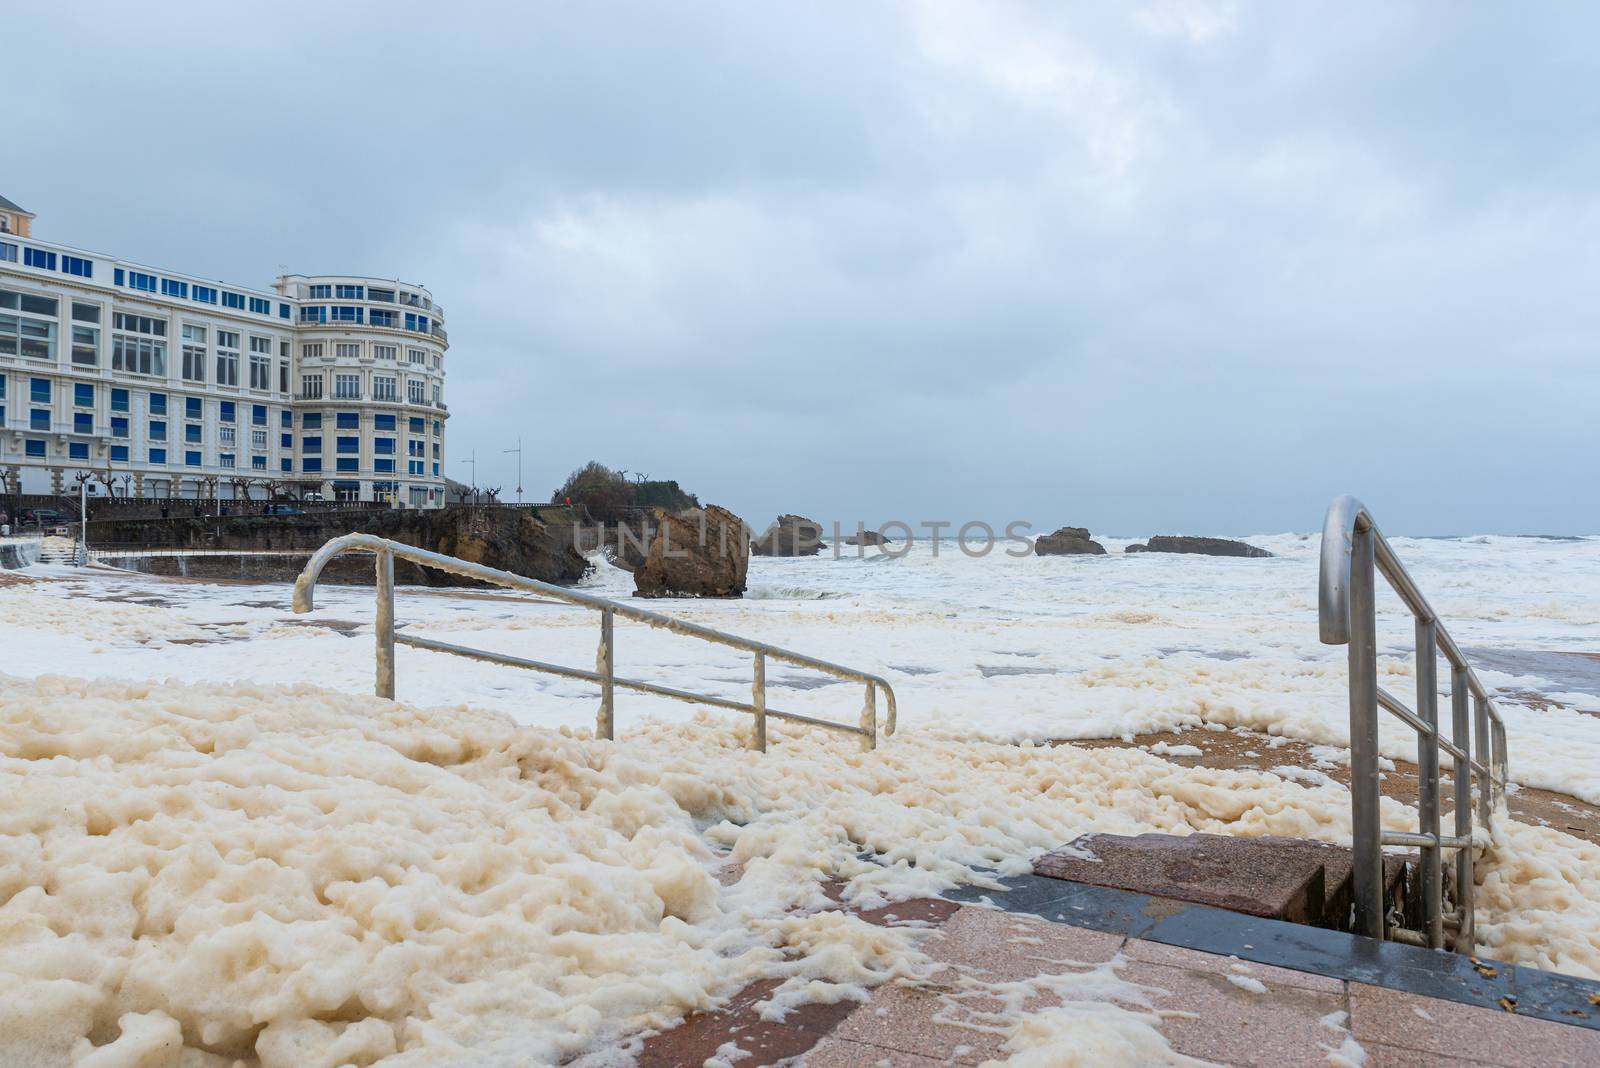 Foam on the Grande Plage beach and its quay during a storm, France